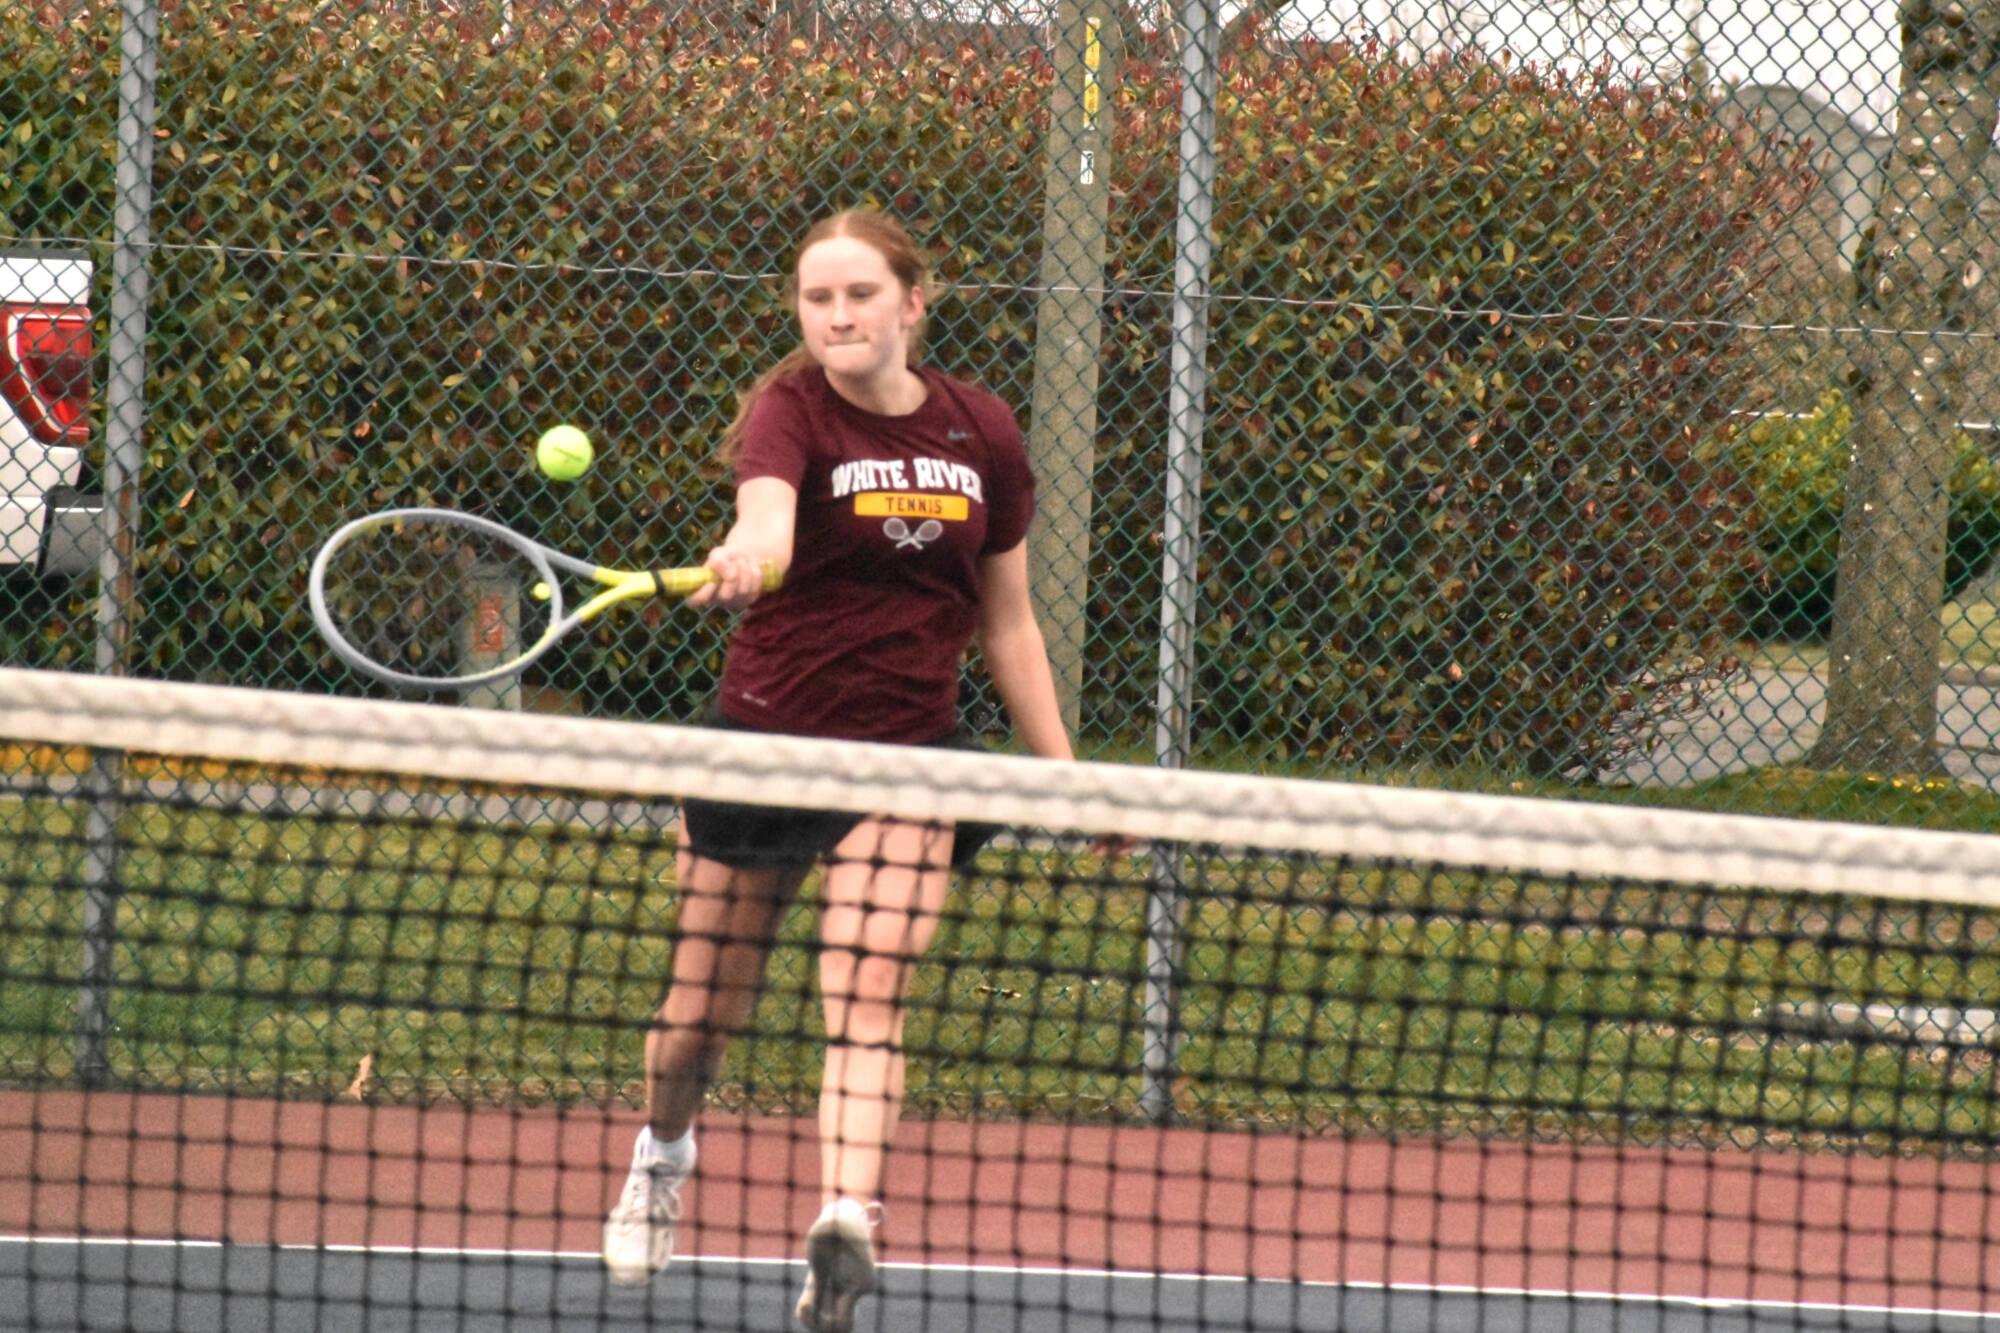 PHOTO BY KEVIN HANSON 
White River High senior Ava Steffen has been a mainstay in singles action for the Hornets. Here, she returns a serve during a March 30 match against Enumclaw.